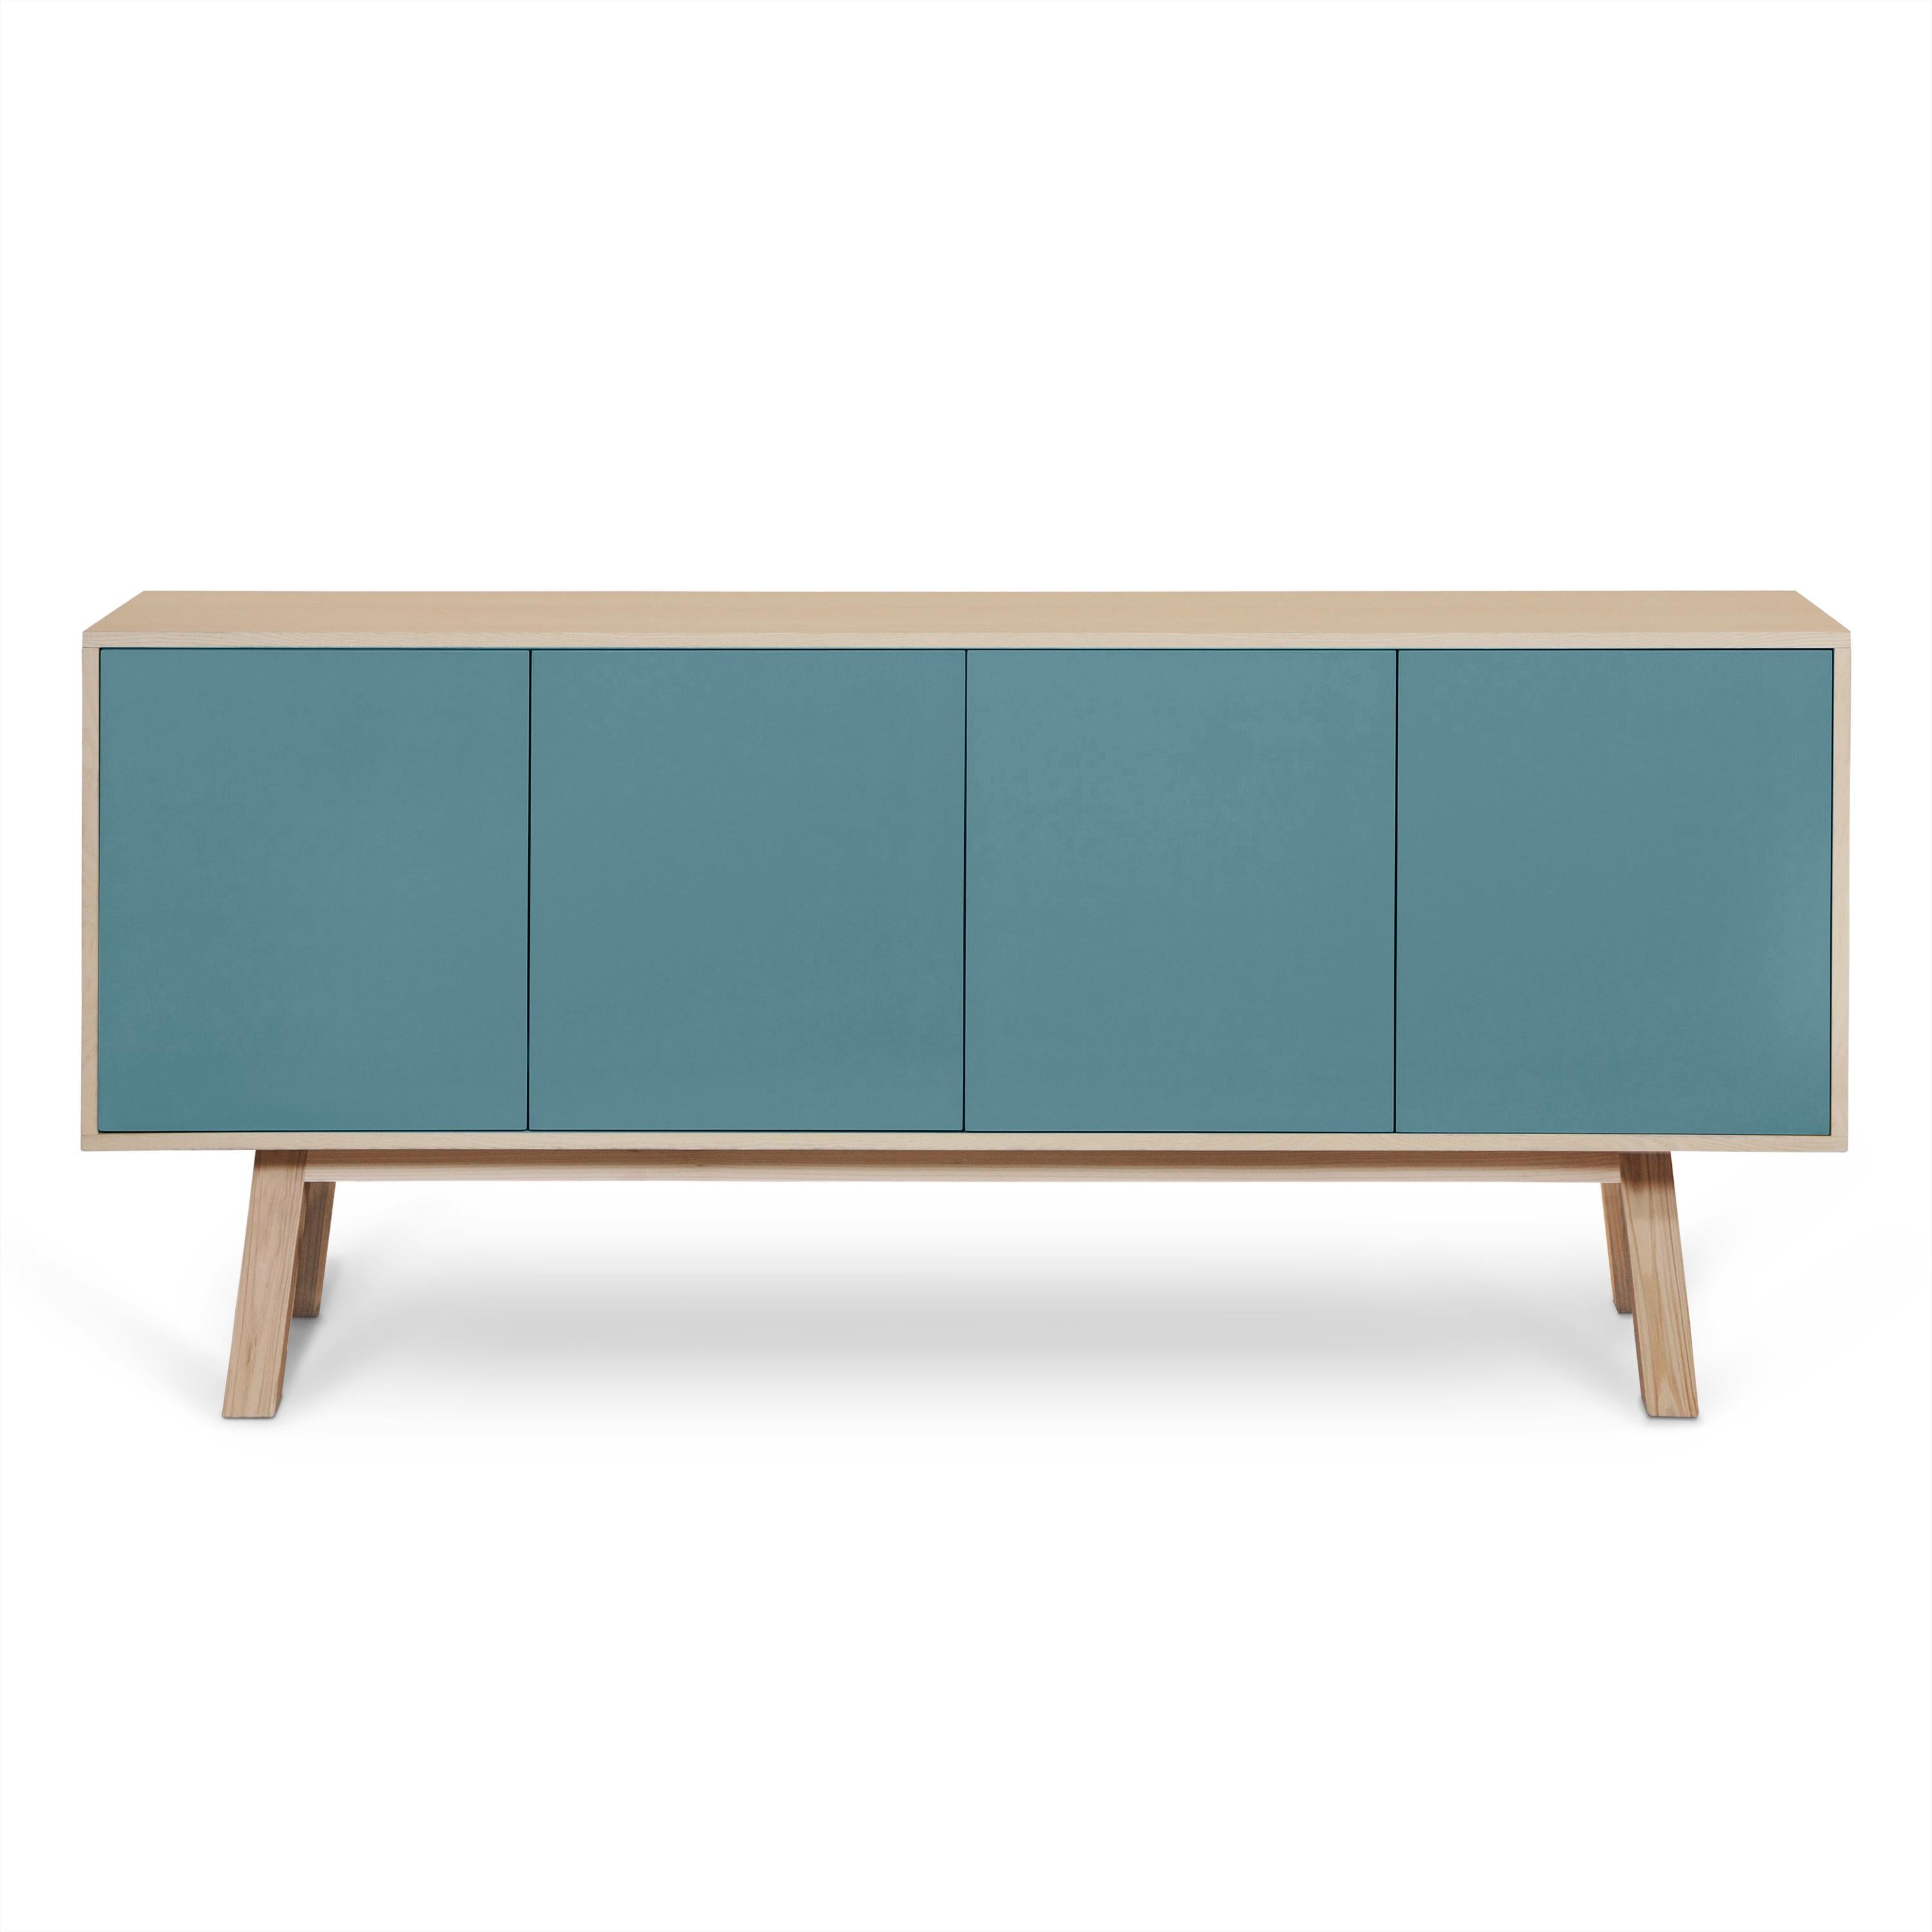 Woodwork Light Blue 4-Door Sideboard Kube in Ash Wood, Design by Eric Gizard, Paris For Sale